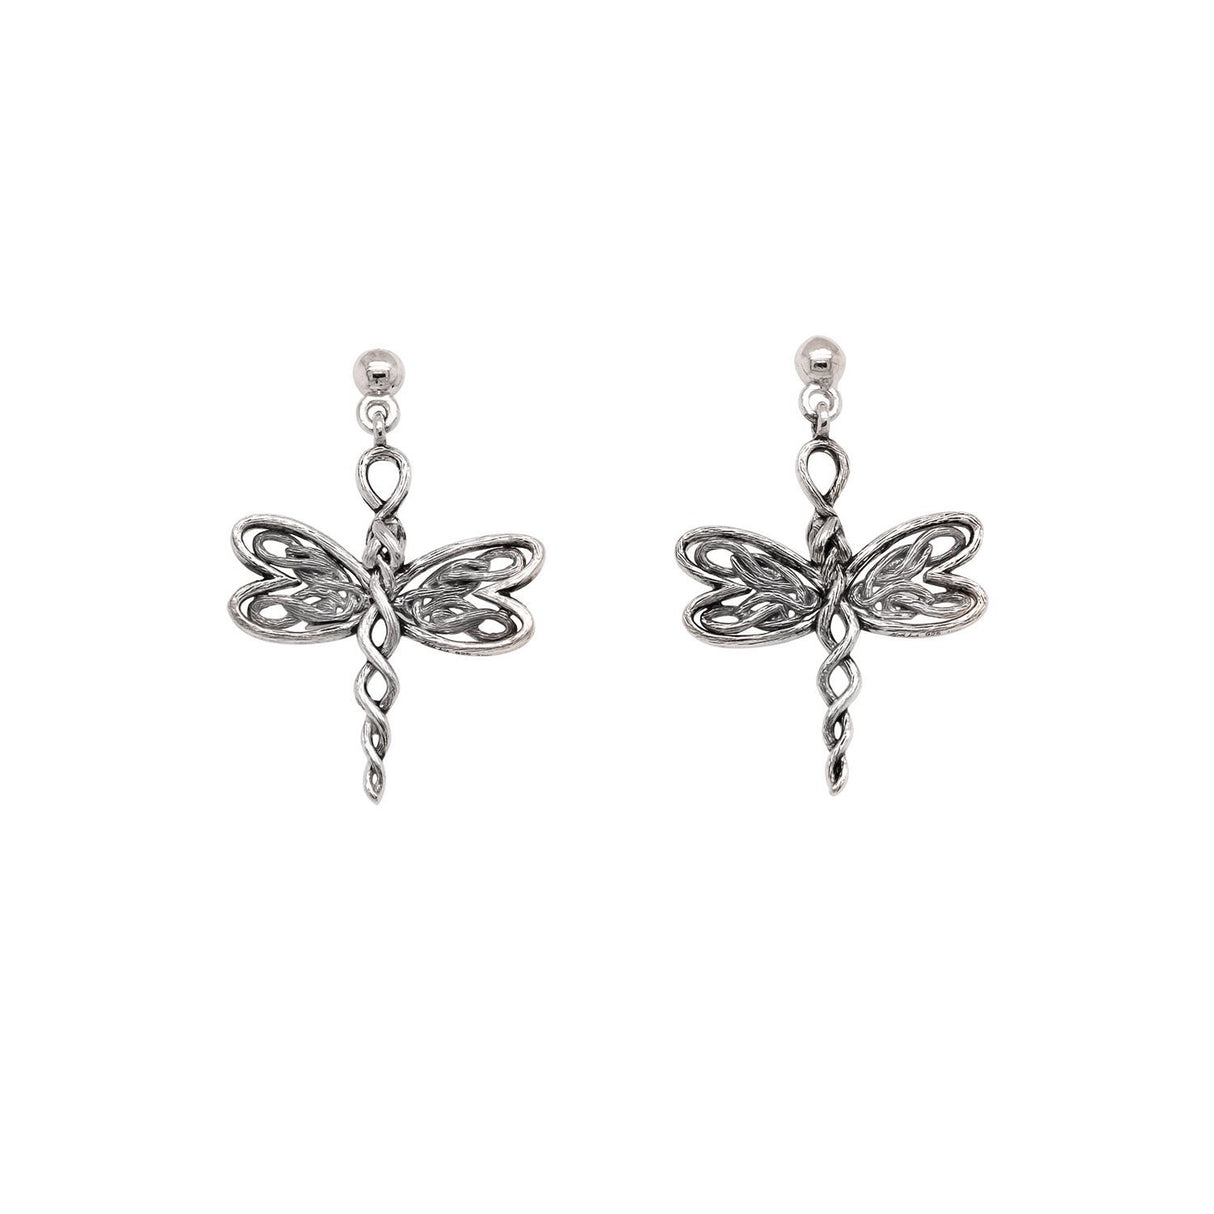 Dragonfly Post Earrings - Sterling Silver / Dark Rhodium and White Cubic Zirconia